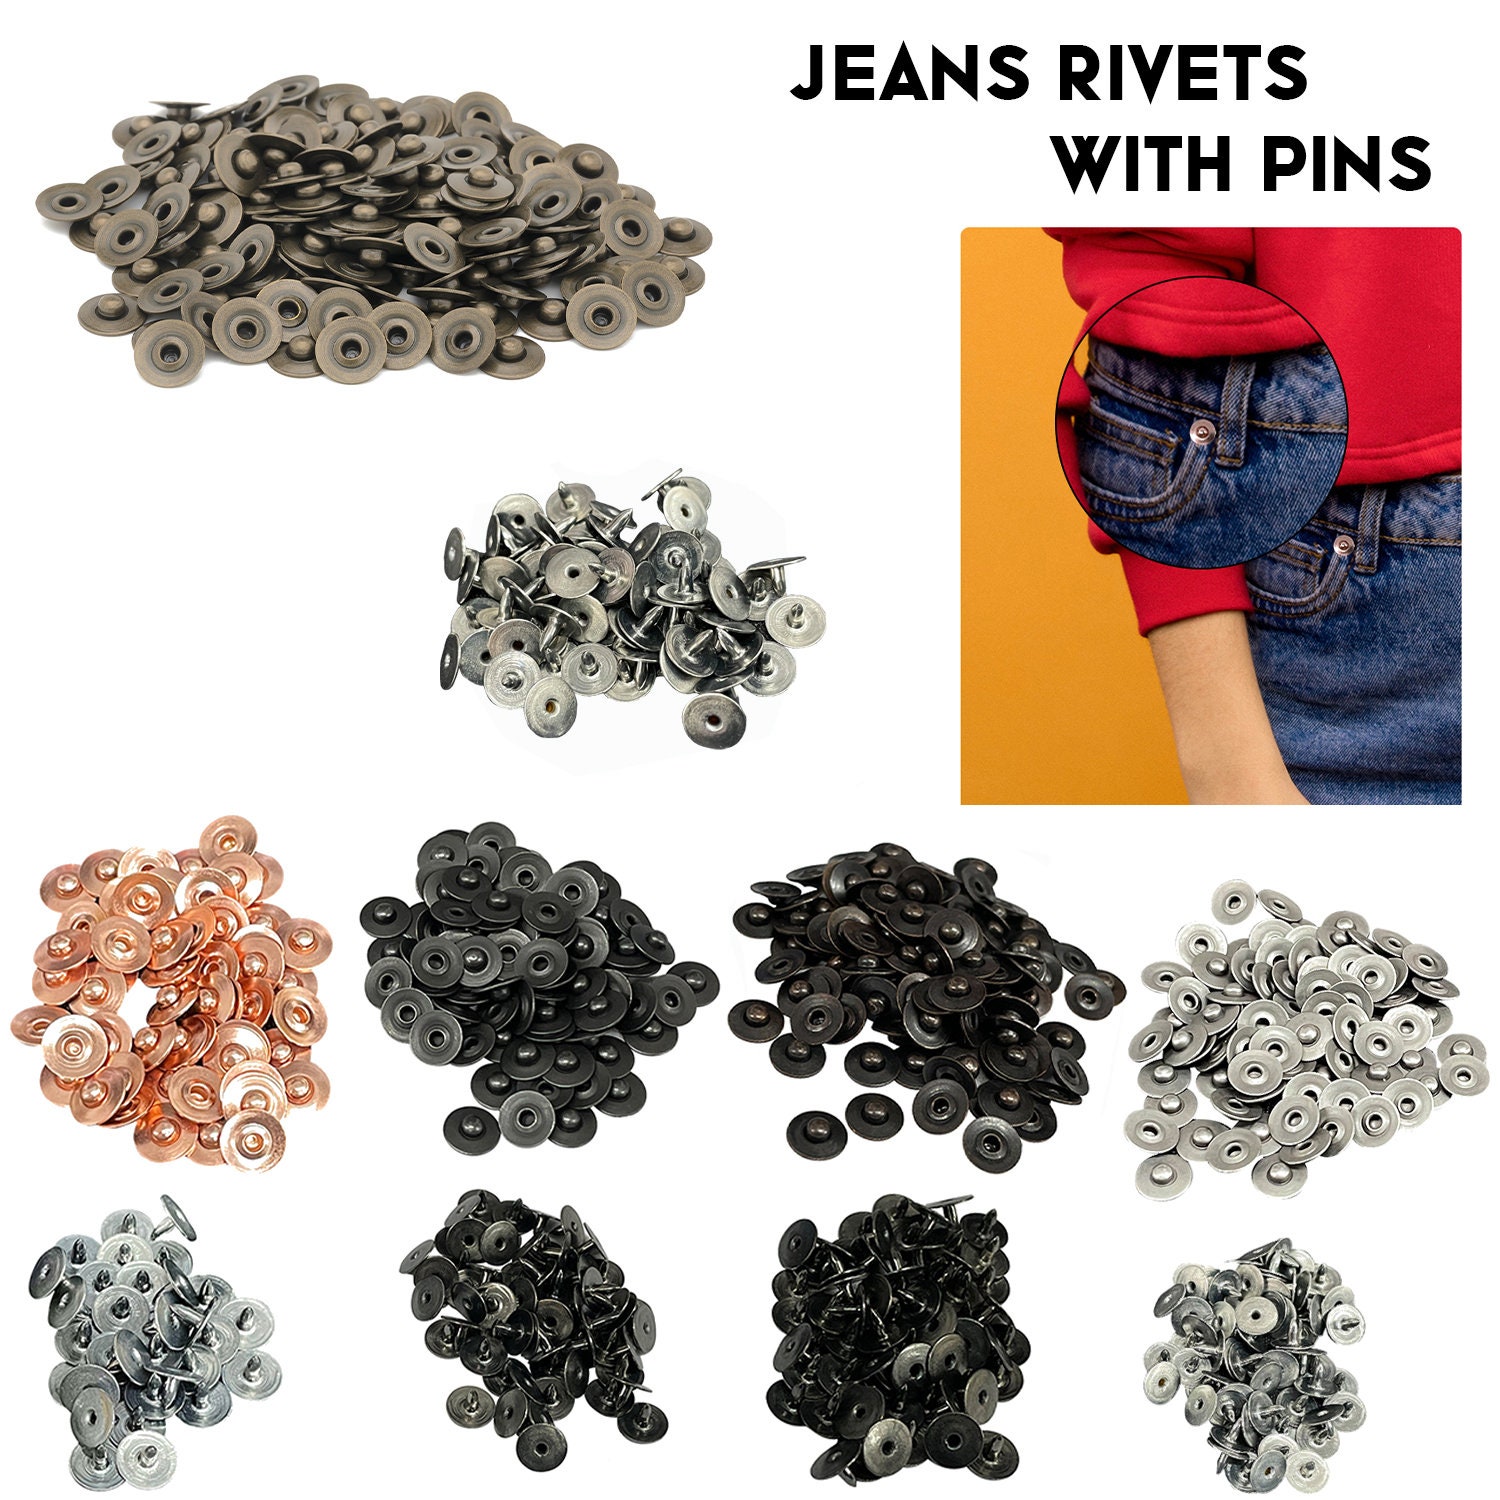 Extensions of Jeans Pants or Skirts With Adjustable Buttons, 